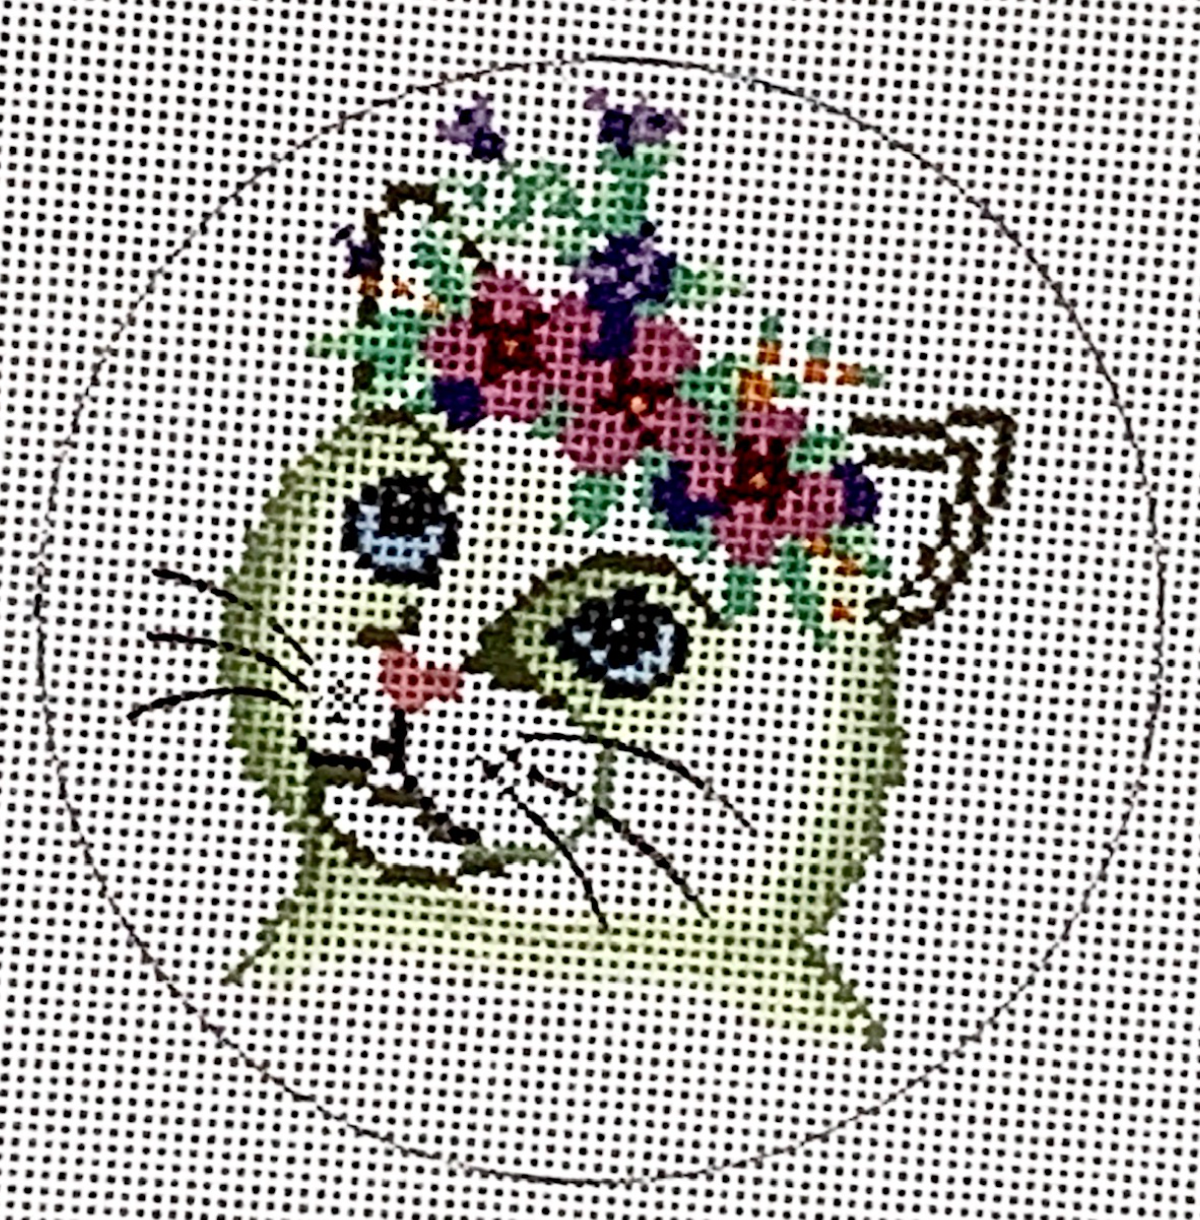 JA-13 White Cat with Flower Crown